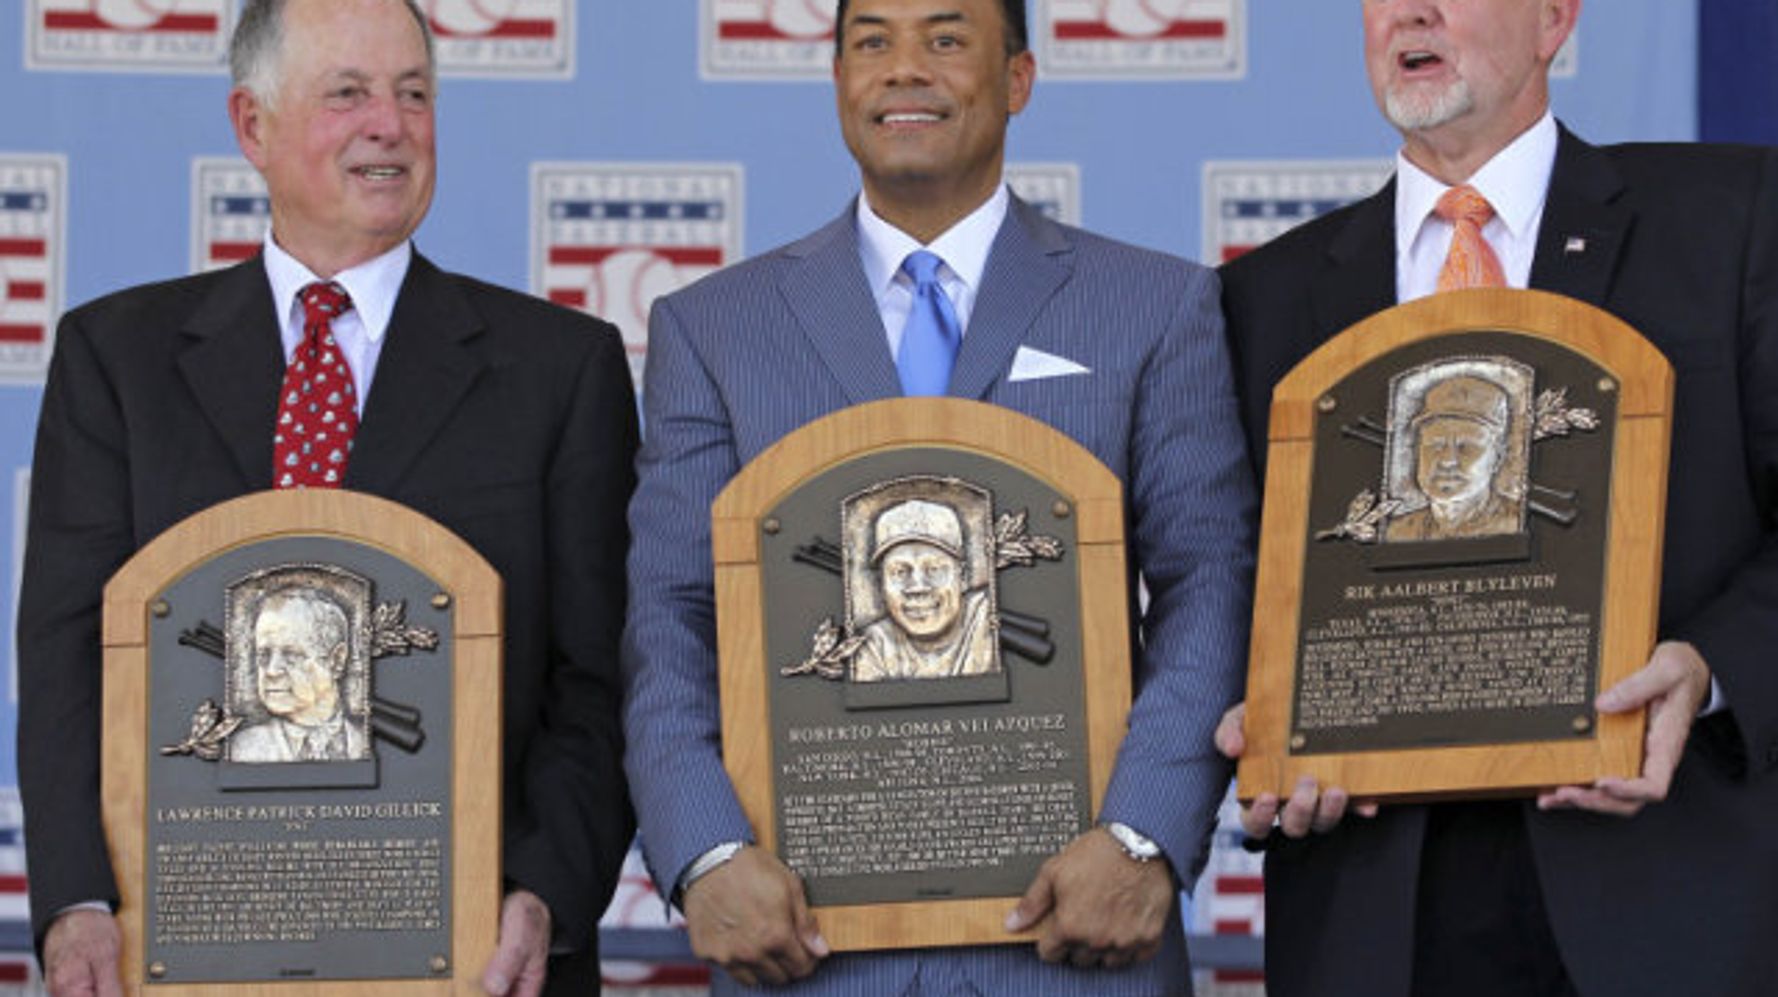 Jays take down Alomar banner, remove his name from Level of